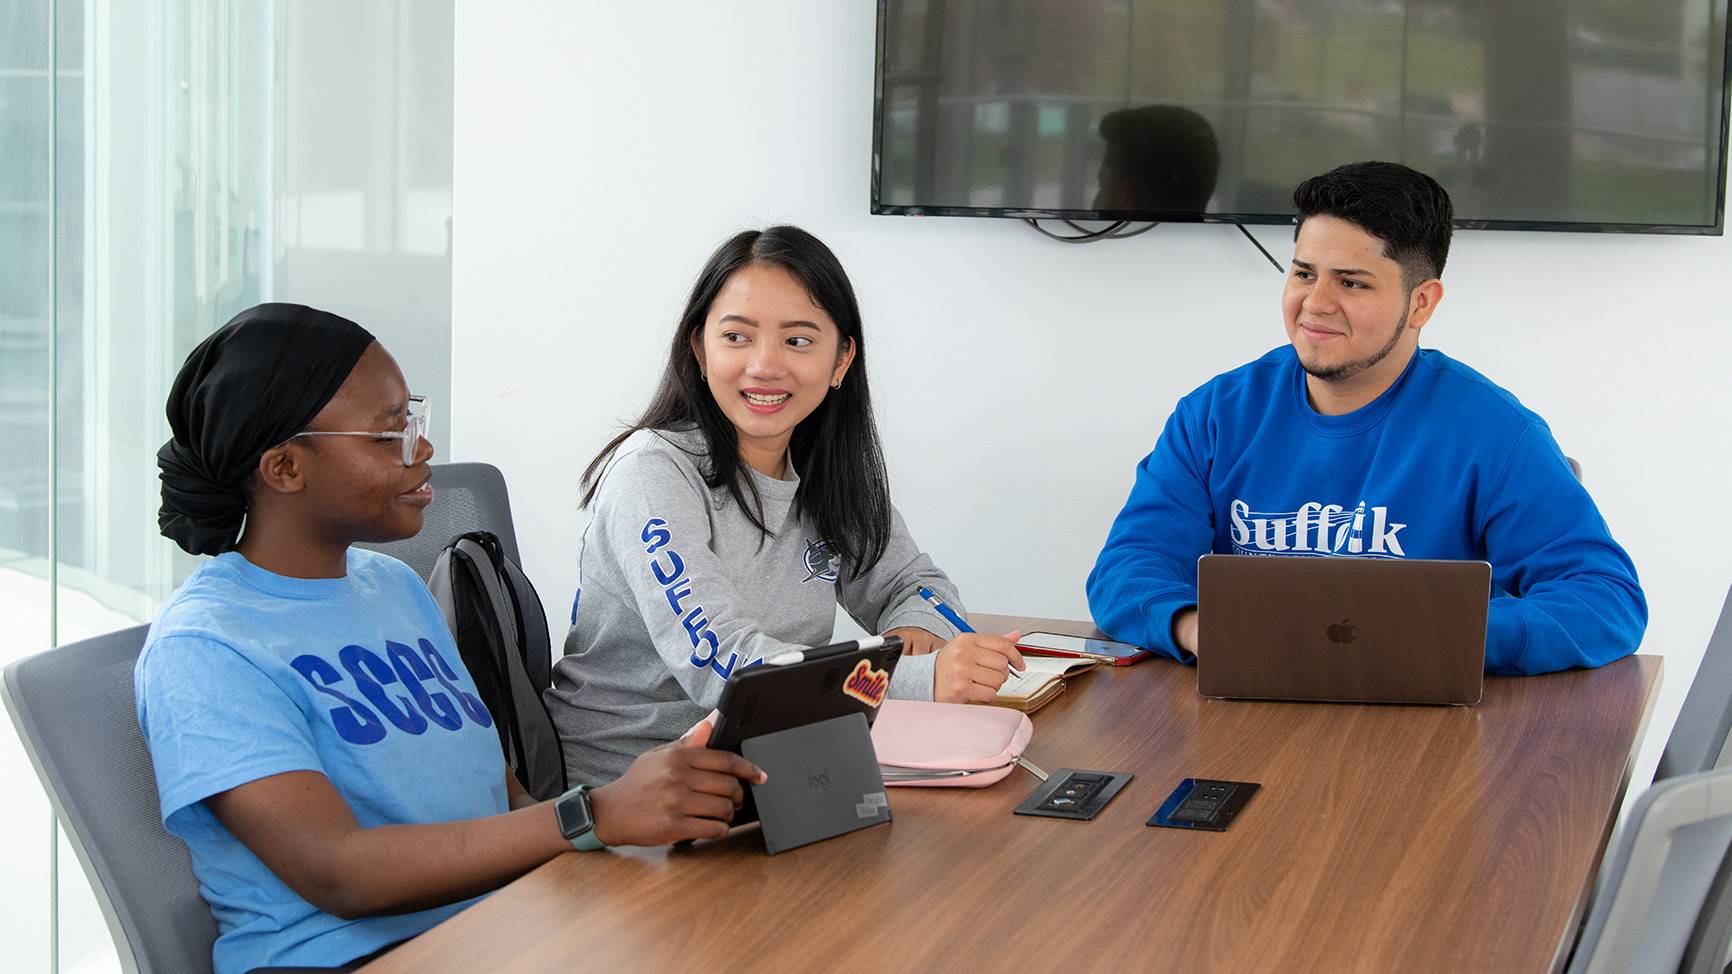 Three students sitting together at a desk with laptops